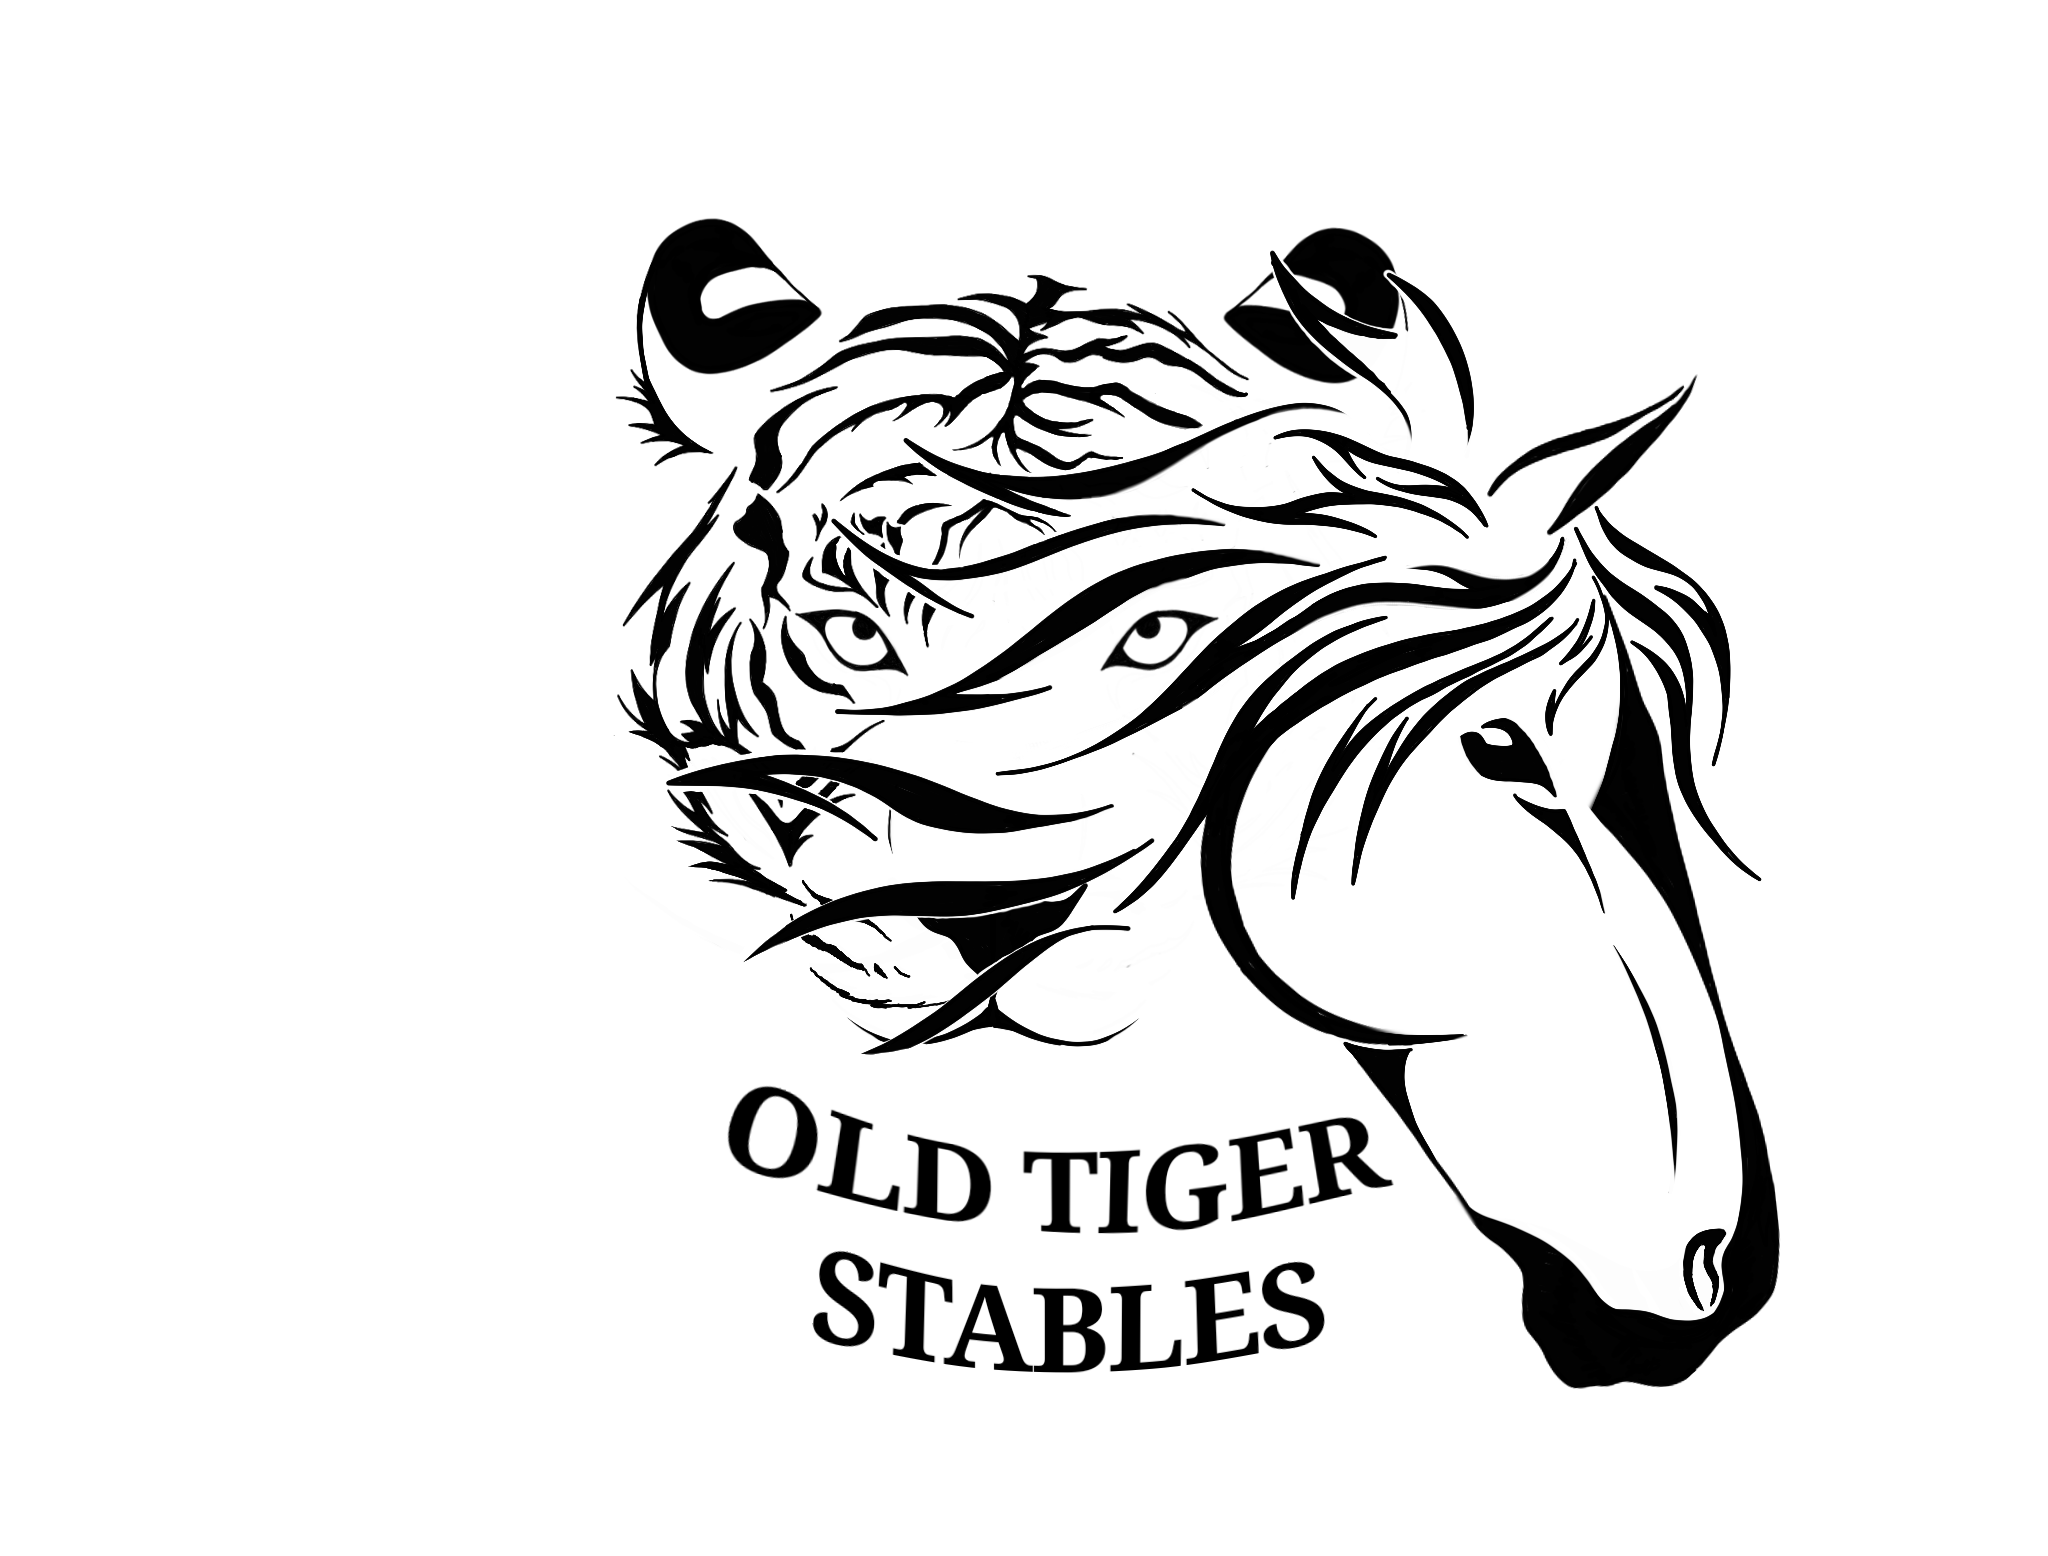 The Old Tiger Stables logo